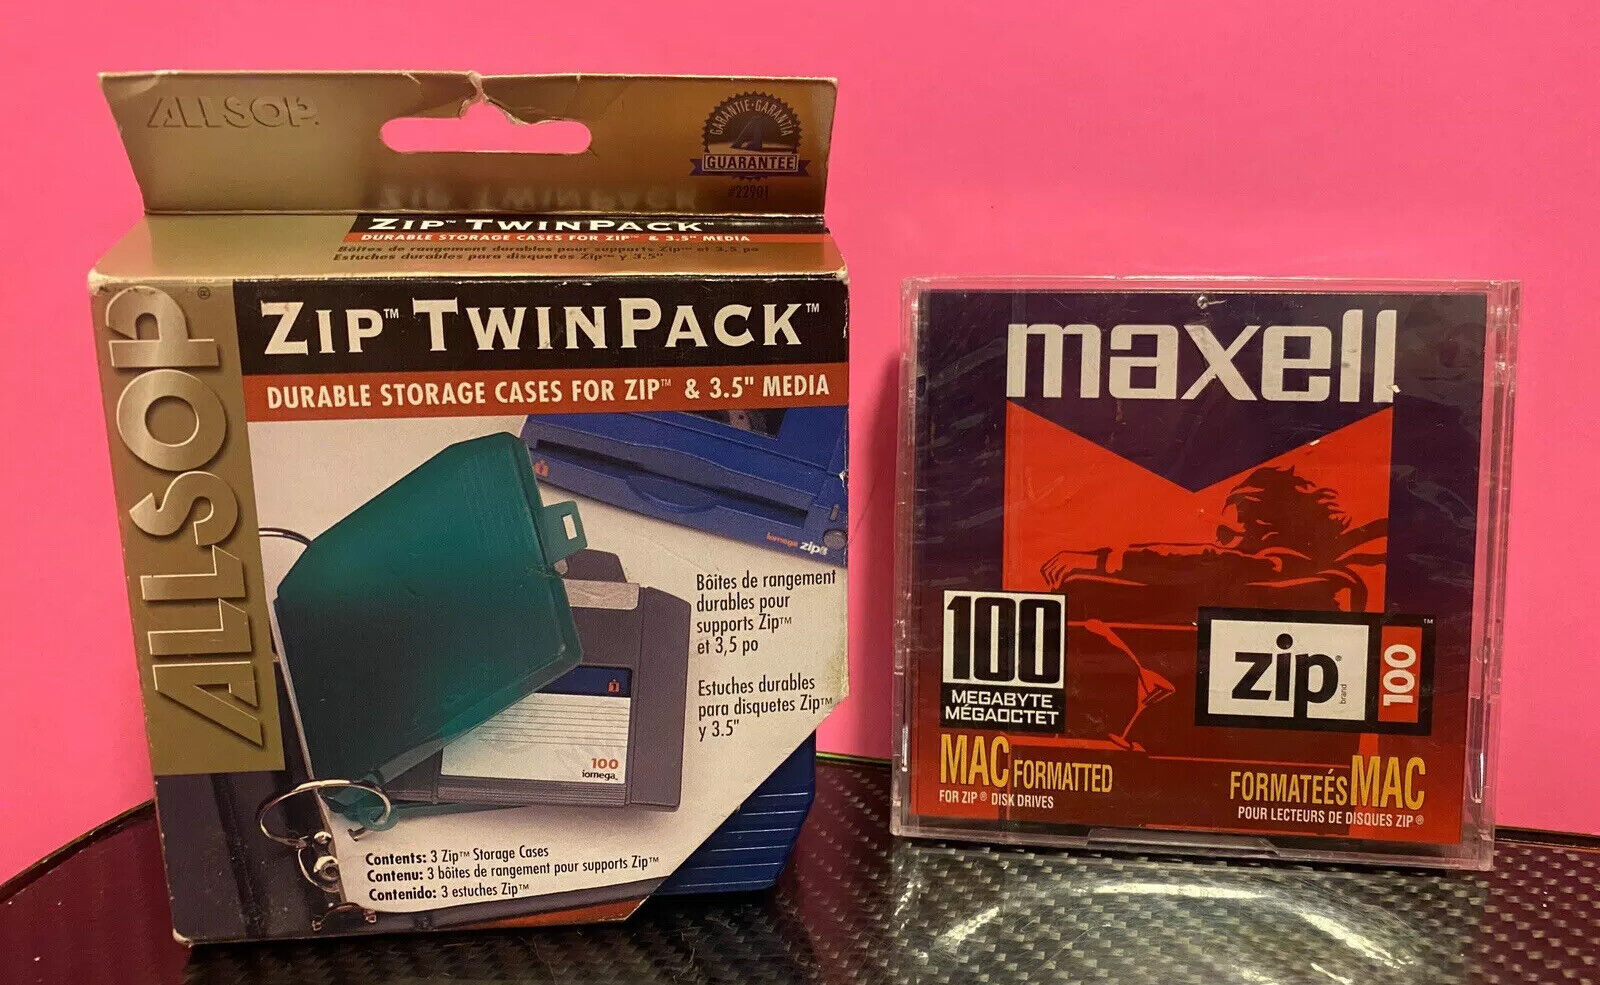 Maxell 100 MB Mac Formatted Zip Disk  And Allsop Zip Cases New